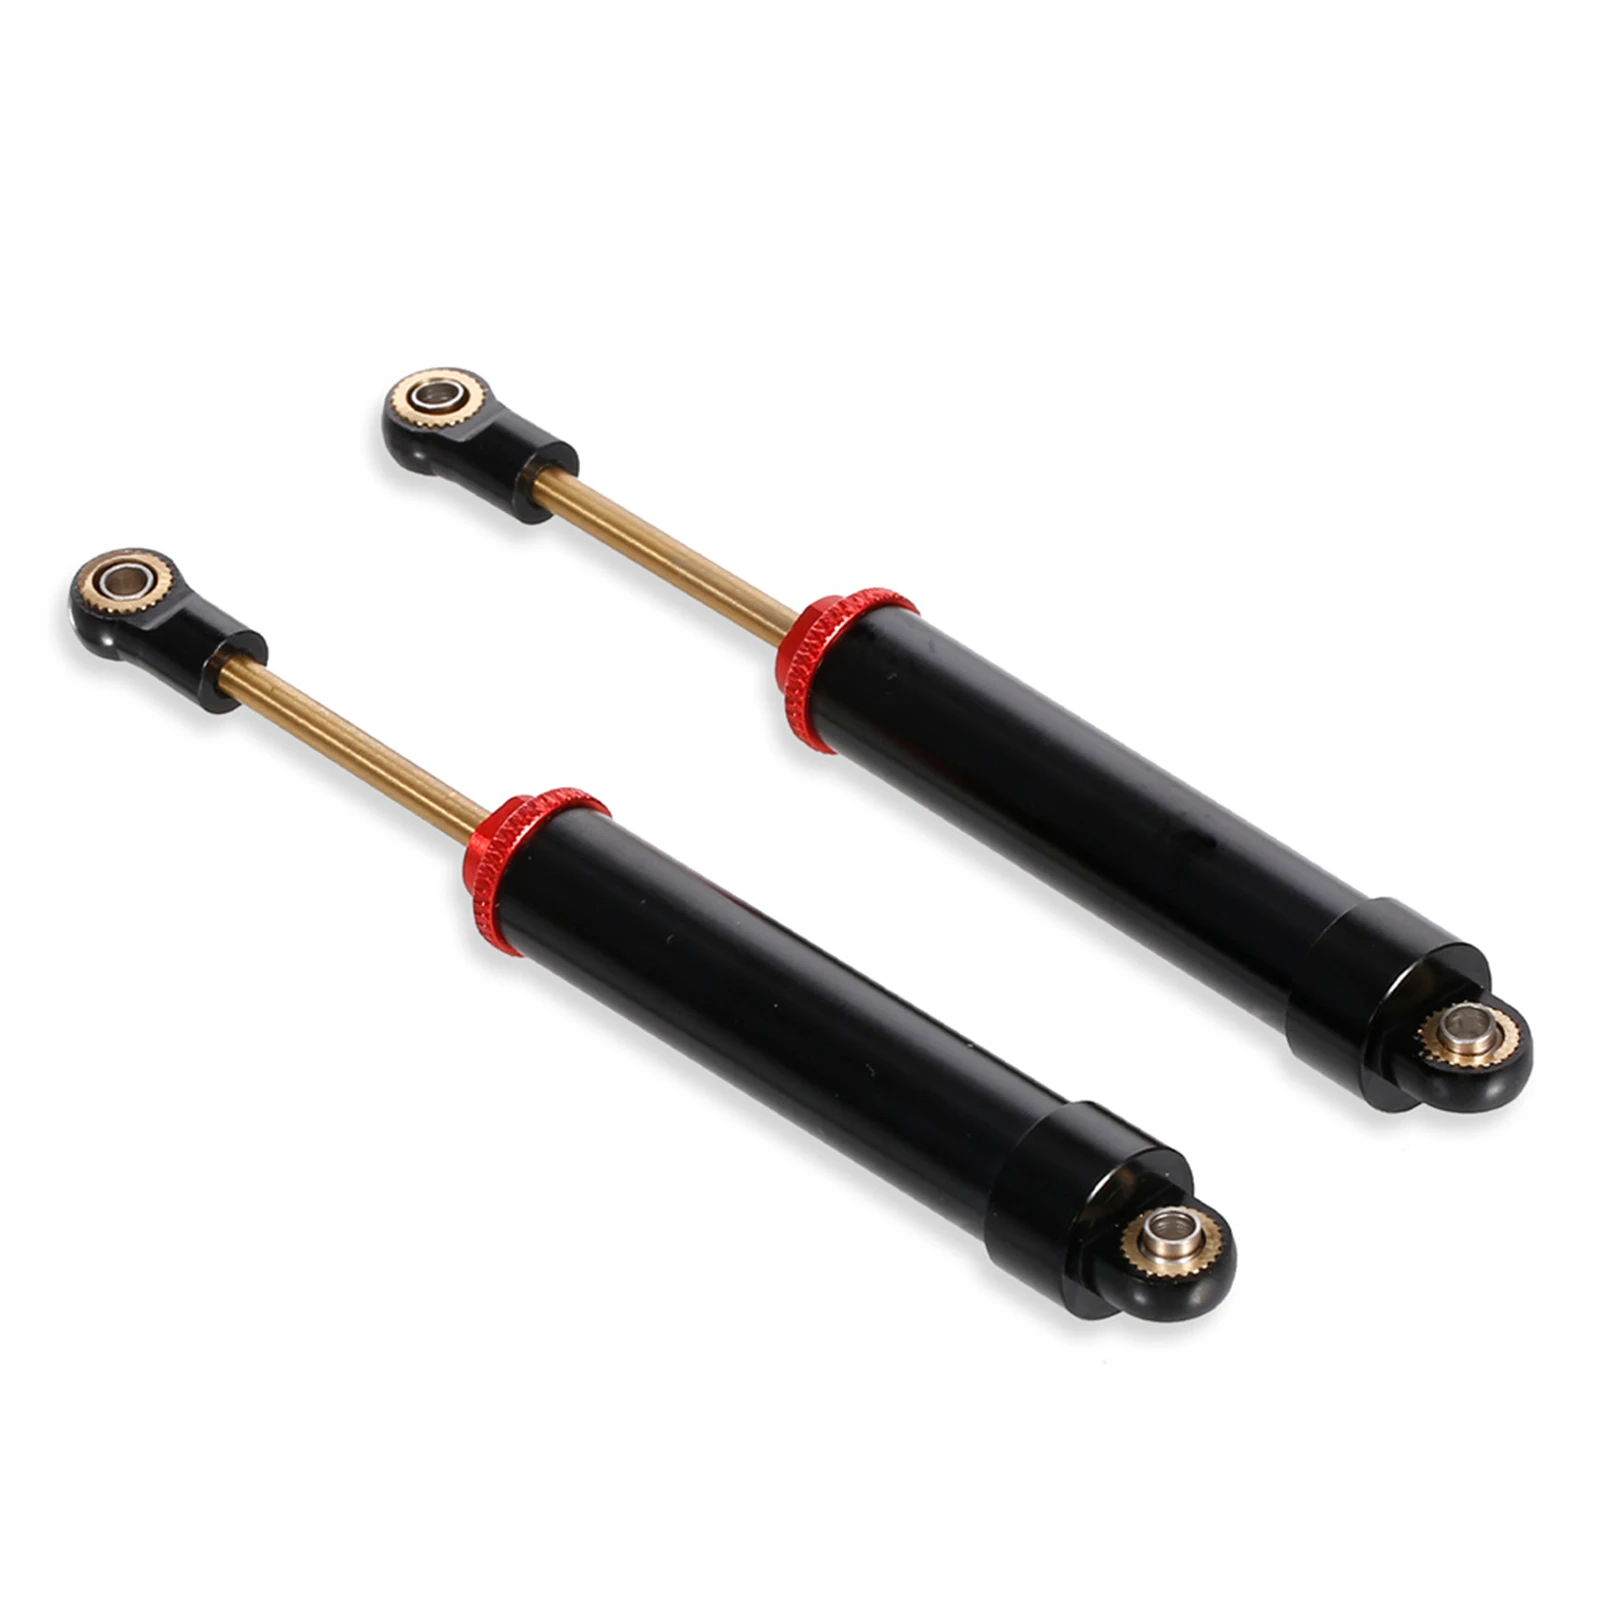 1Pairs Shock Absorber Damper Spare Parts for Axial SCX10 90046 -4 RC Car Repalcement Parts Upgrade Parts Accessories